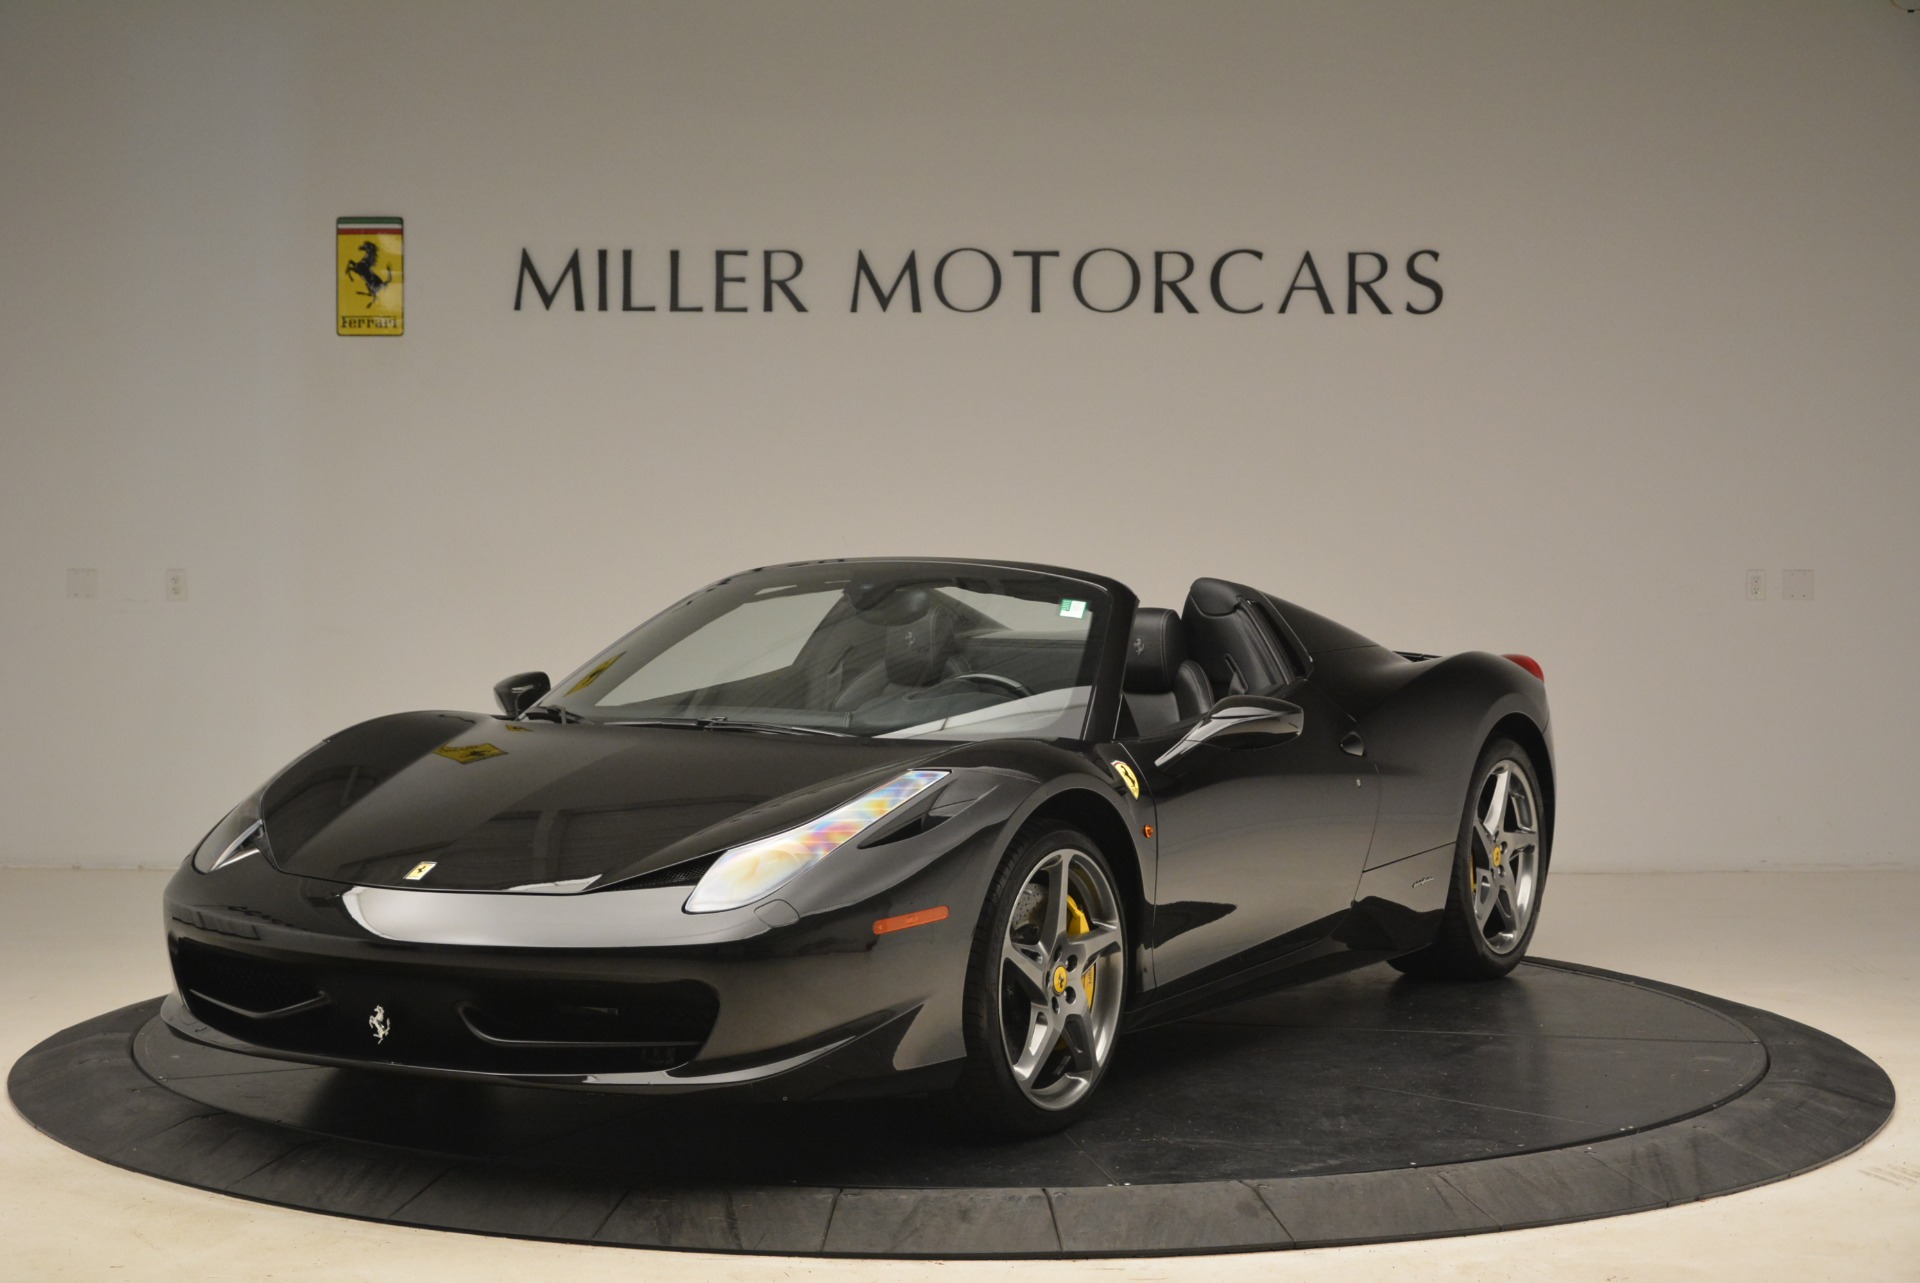 Used 2013 Ferrari 458 Spider for sale Sold at Maserati of Greenwich in Greenwich CT 06830 1